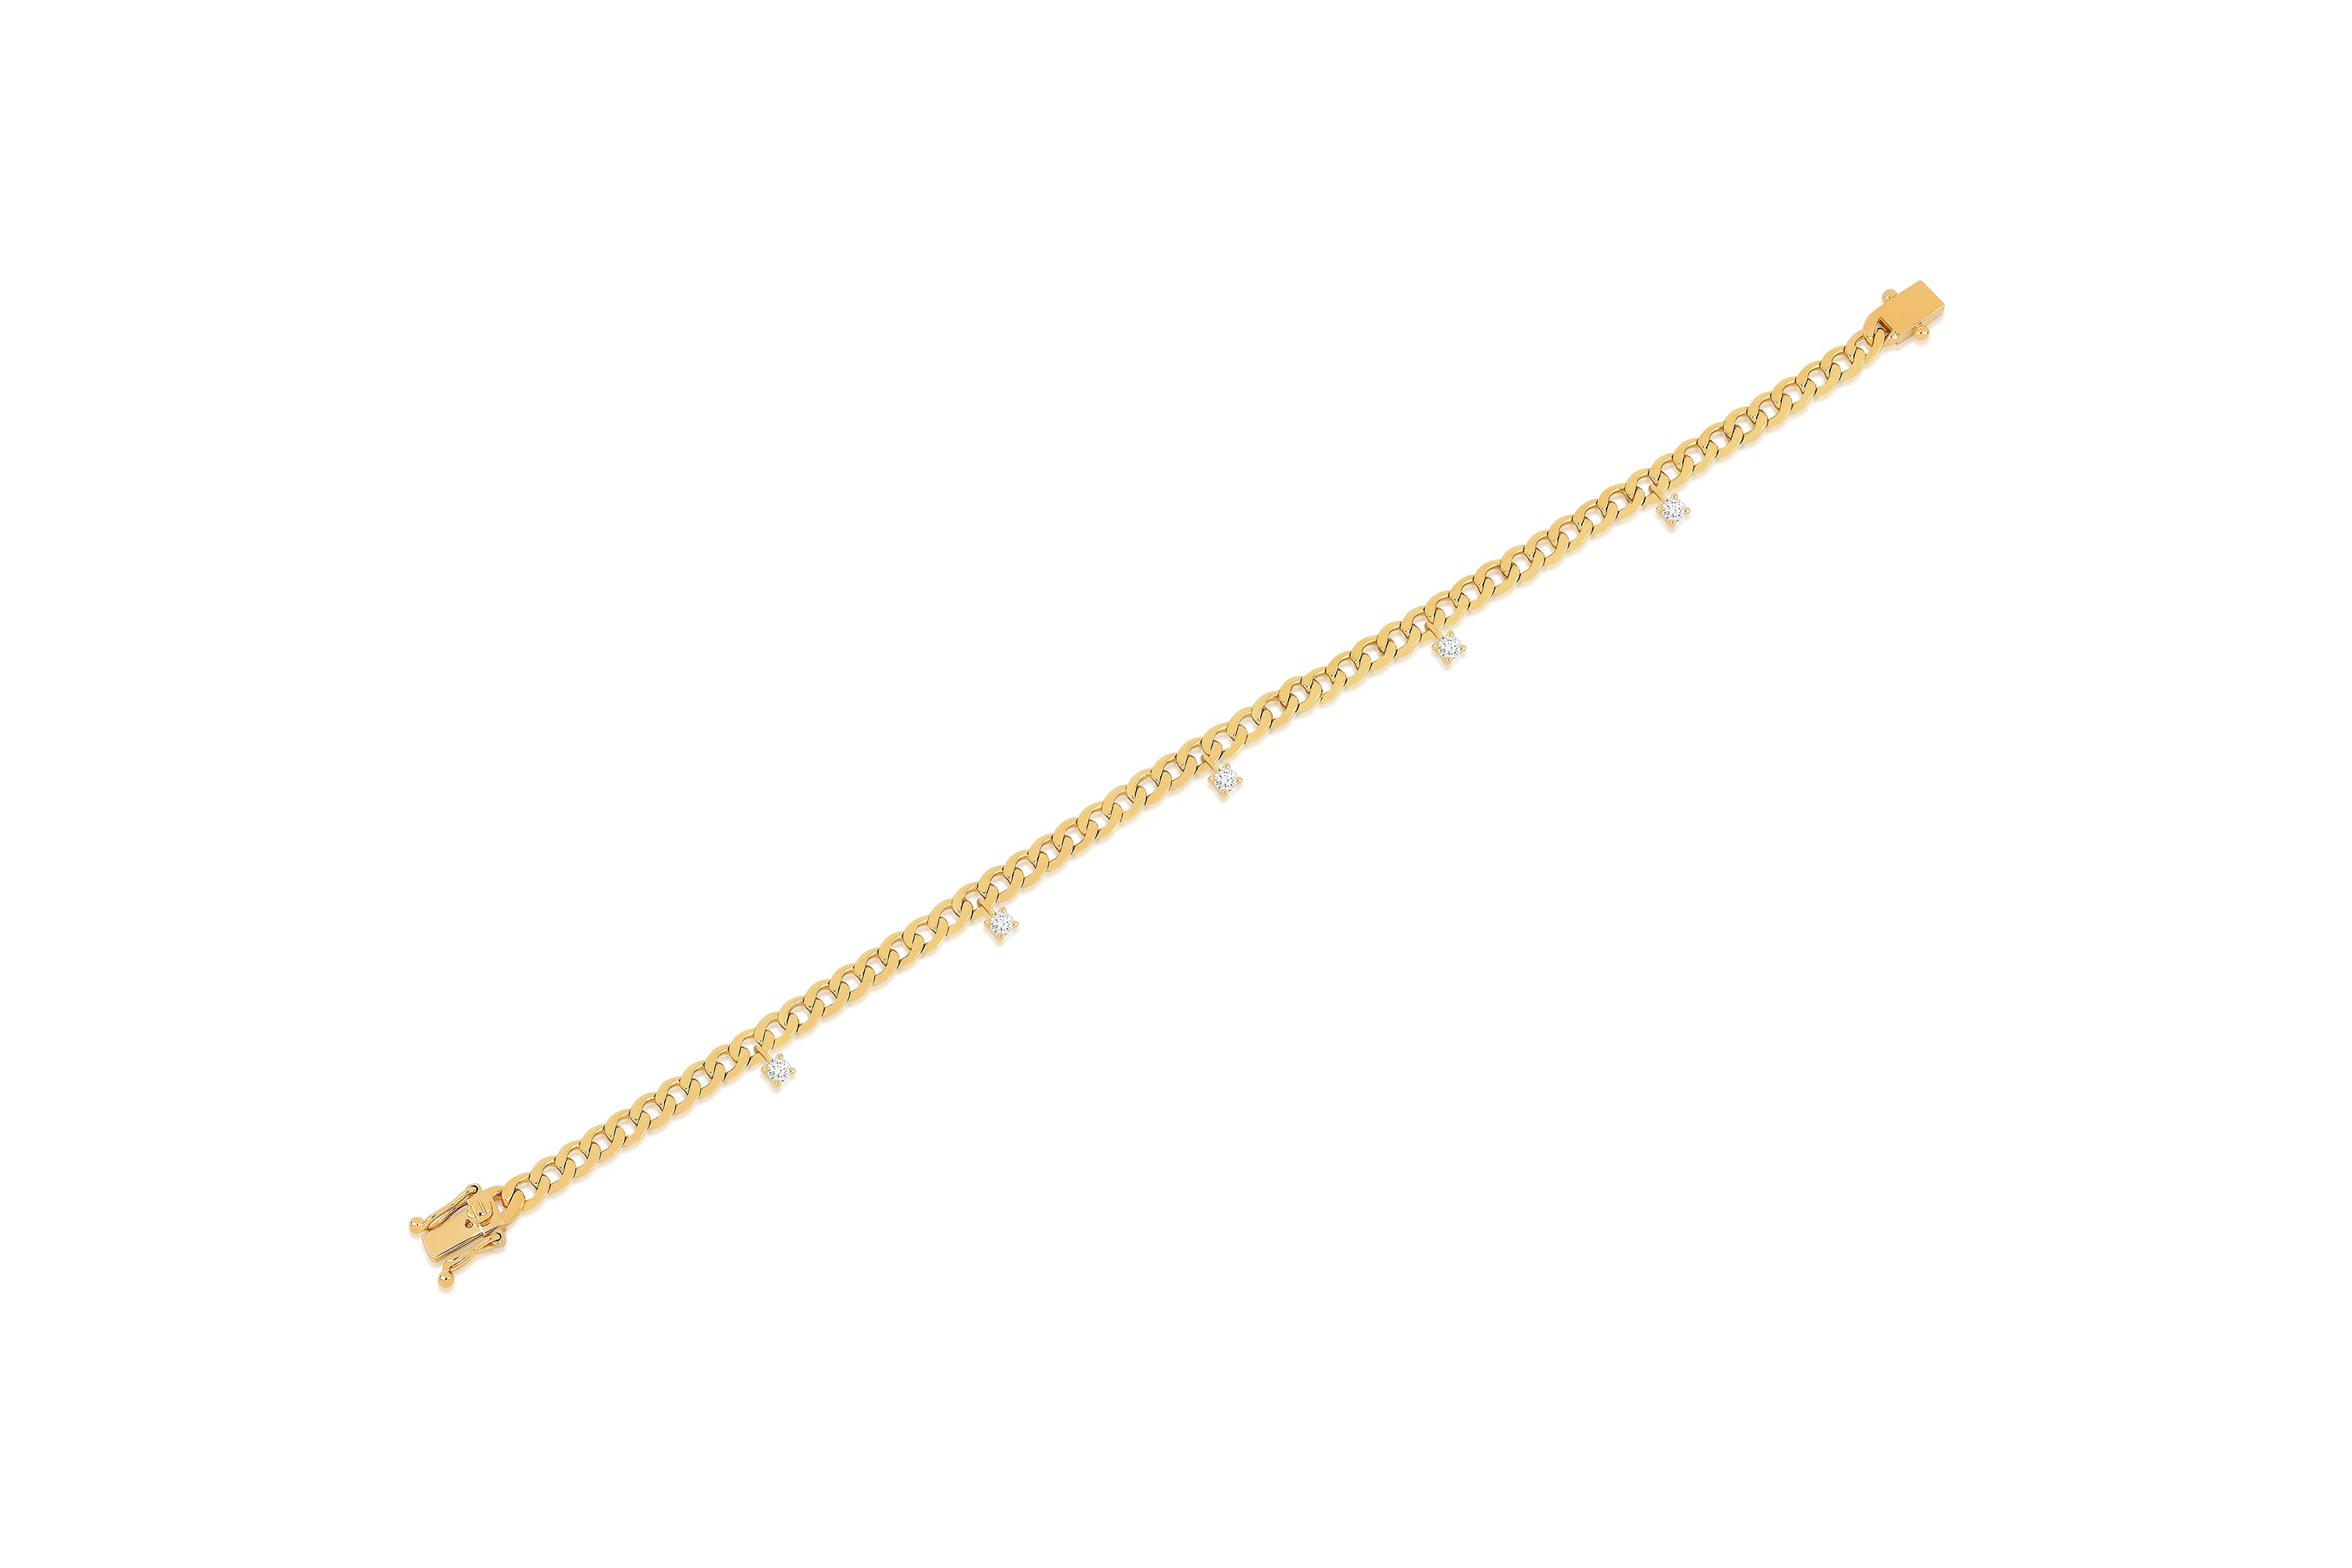 Flat lay of a 14k (karat) yellow gold curb chain bracelet with 5 prong set diamonds dangling from links.